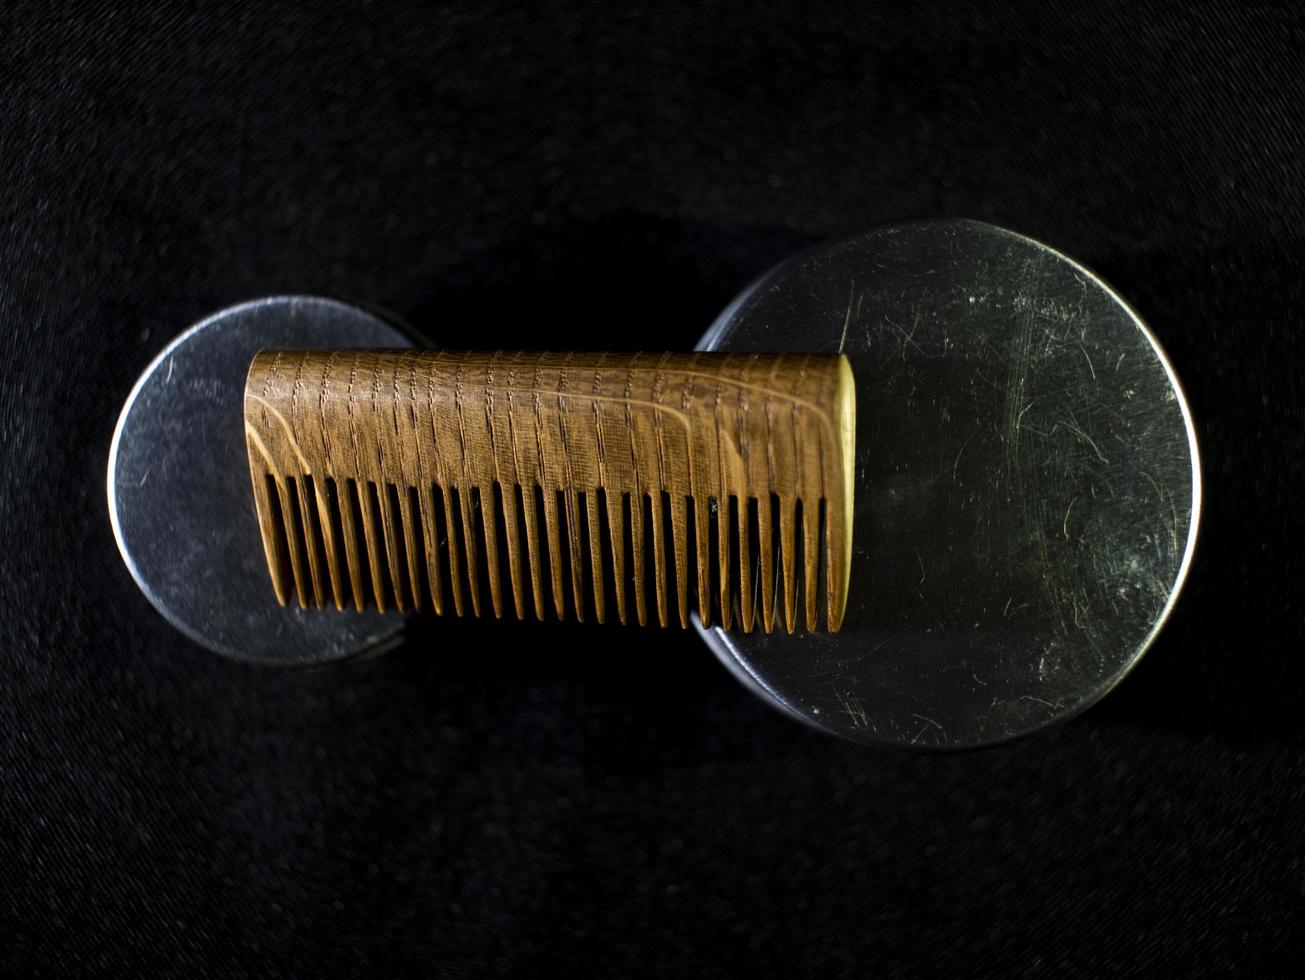 Wooden comb and jars of beard and mustache wax on a black background photo